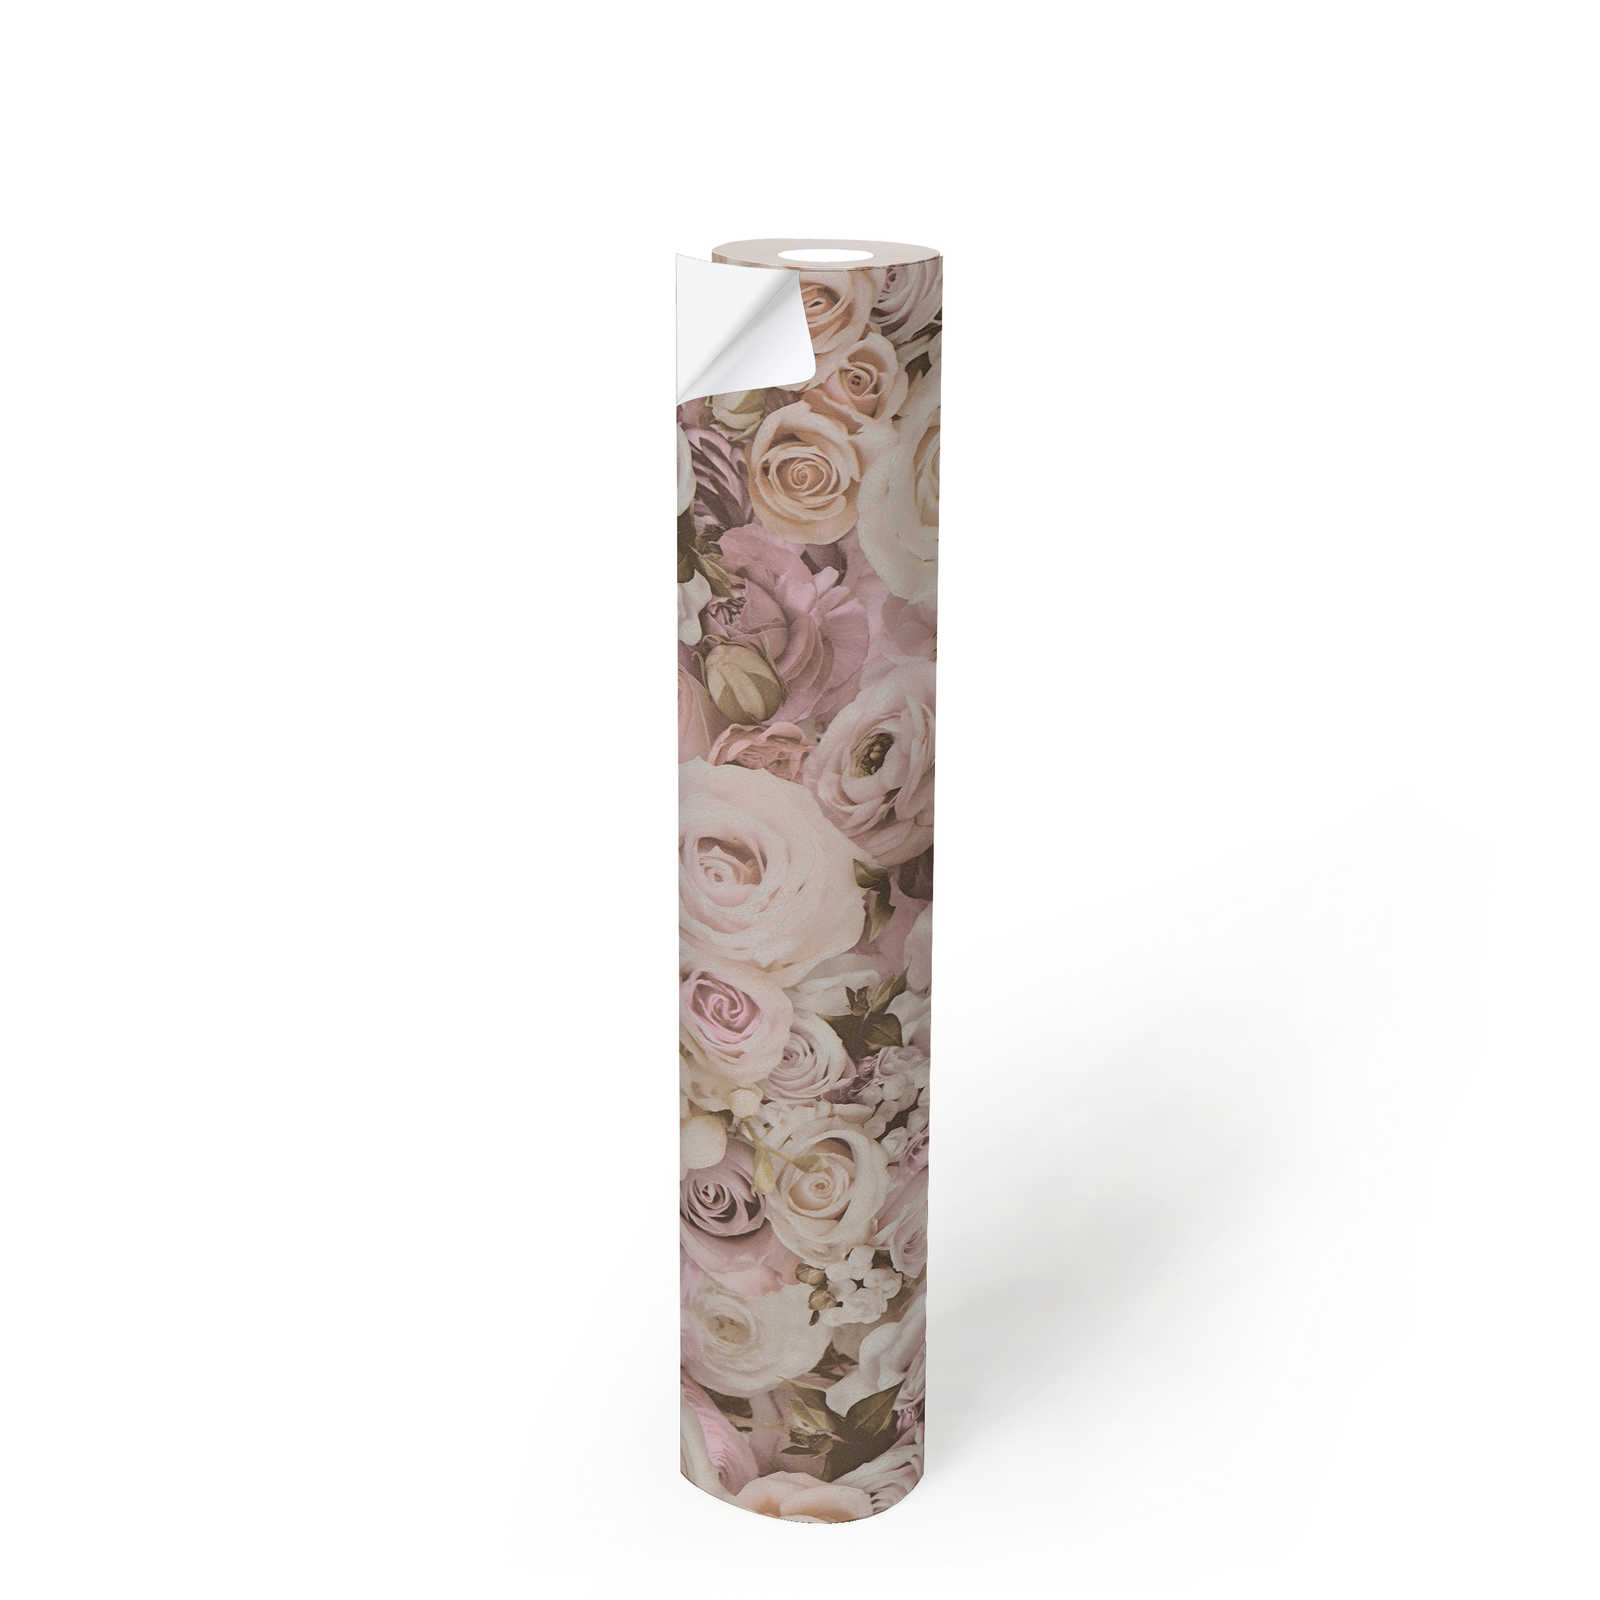             Self-adhesive wallpaper | floral pattern with roses - pink, cream
        